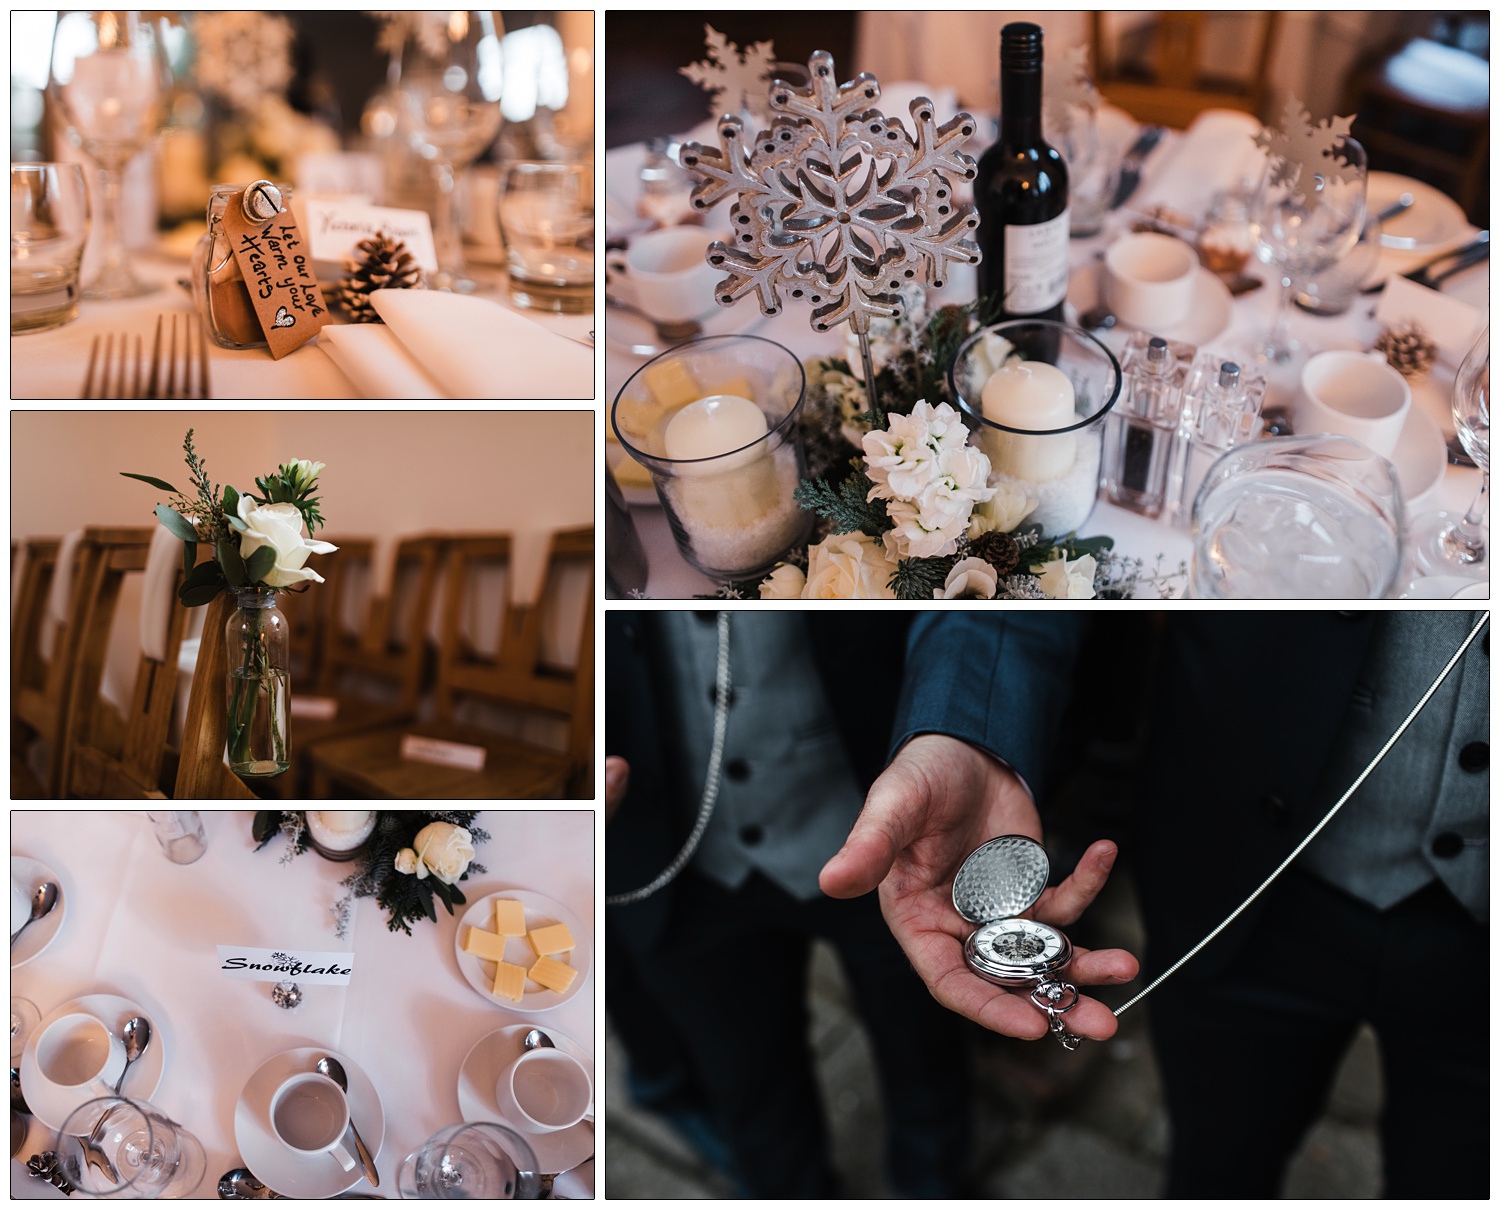 Winter themes wedding details on tables. Snowflakes and pine cones.